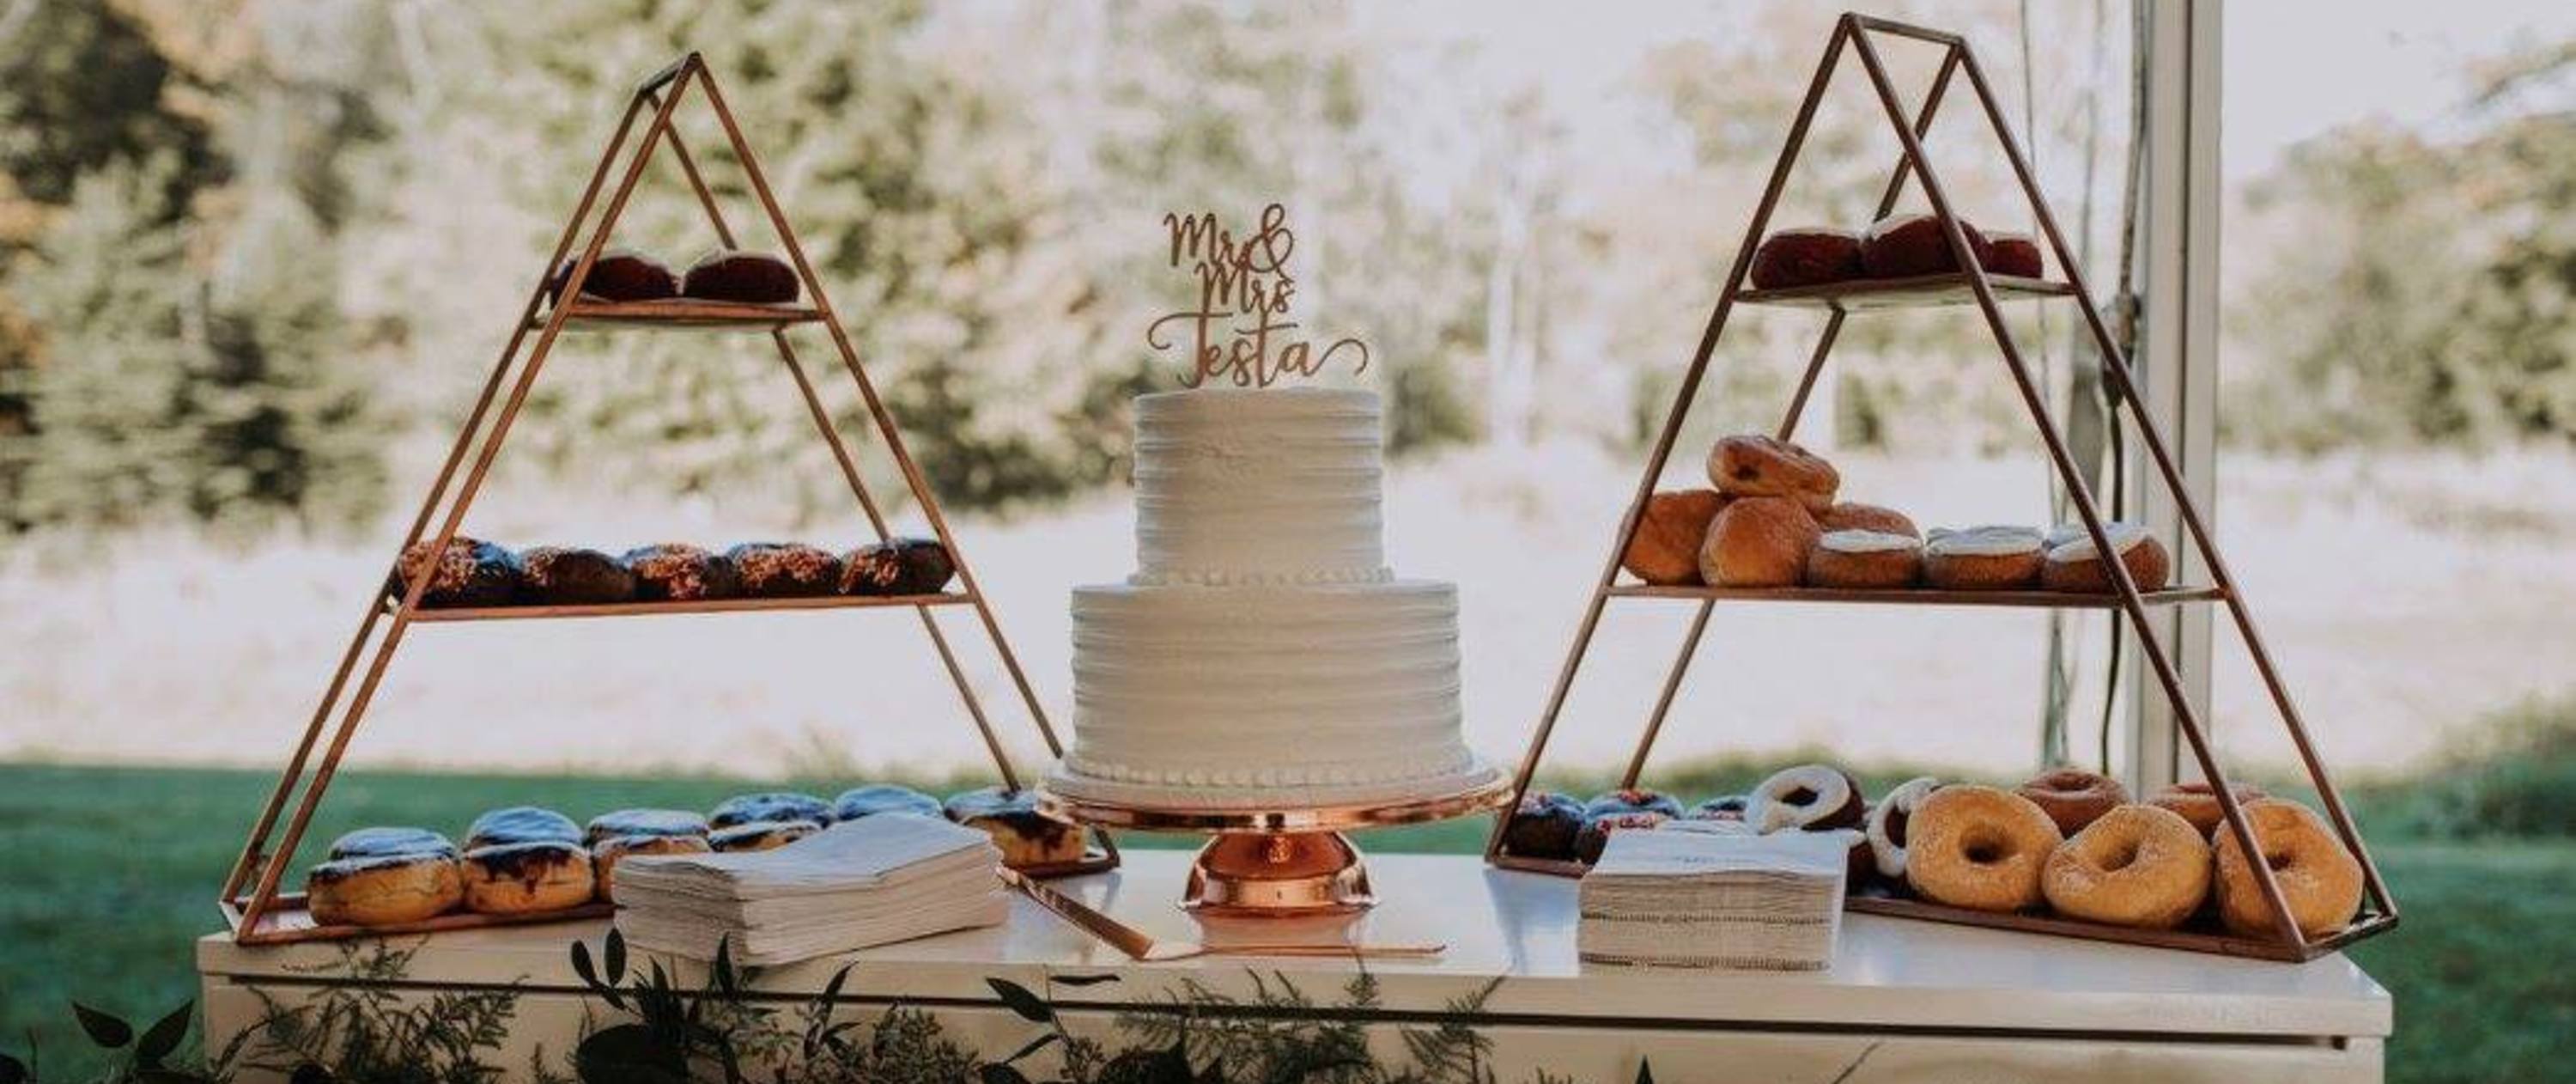 Donut and wedding cake table at a wedding